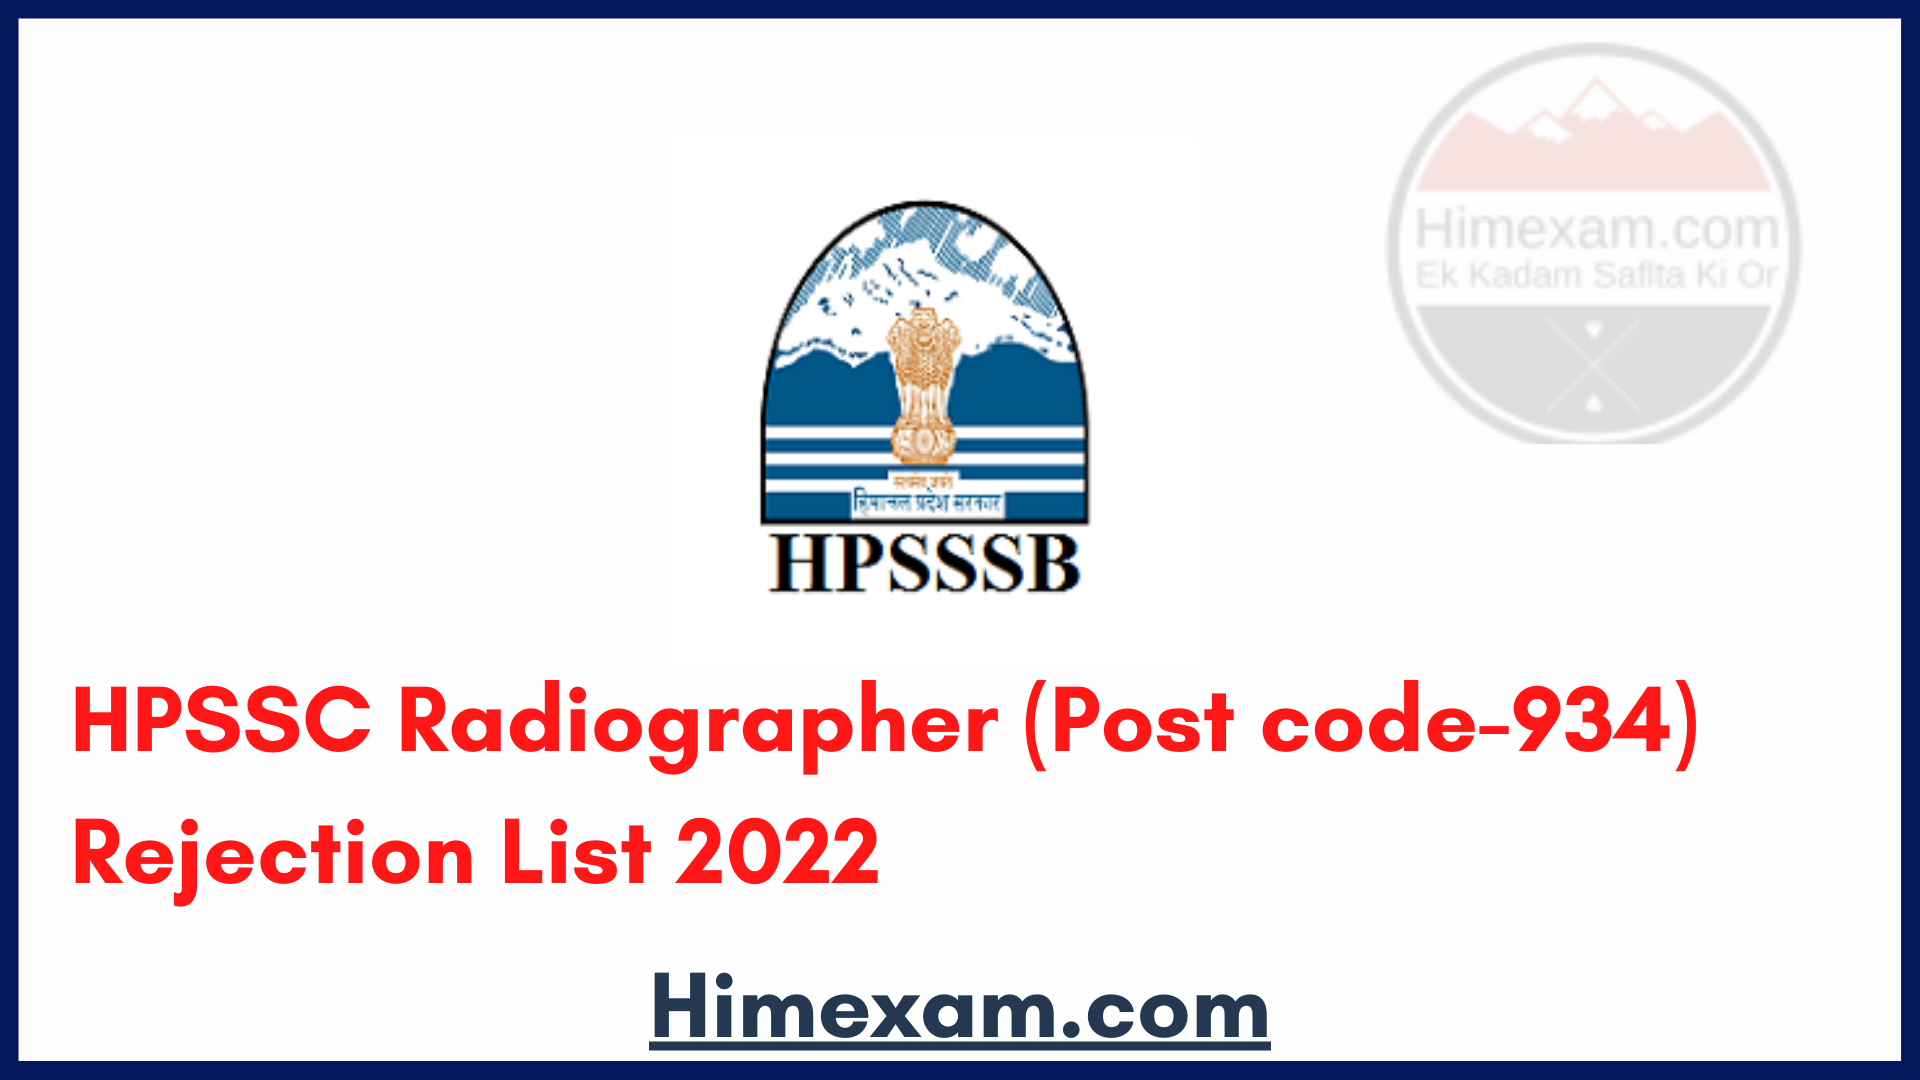 HPSSC Radiographer (Post code-934) Rejection List 2022